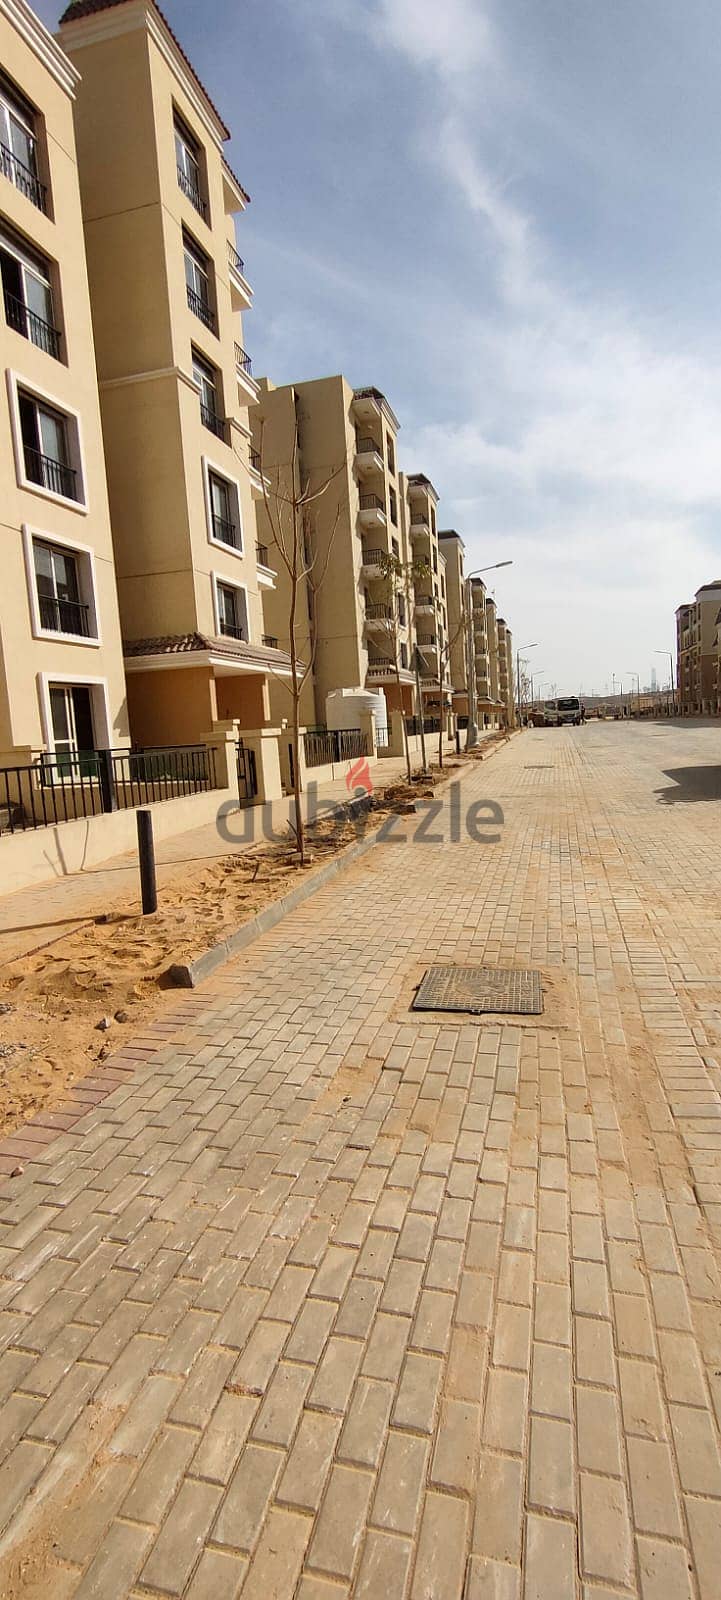 165 sqm apartment with a view garden + 193 sqm private garden for sale in Sarai Compound, Elan phase, with a 10% down payment 11